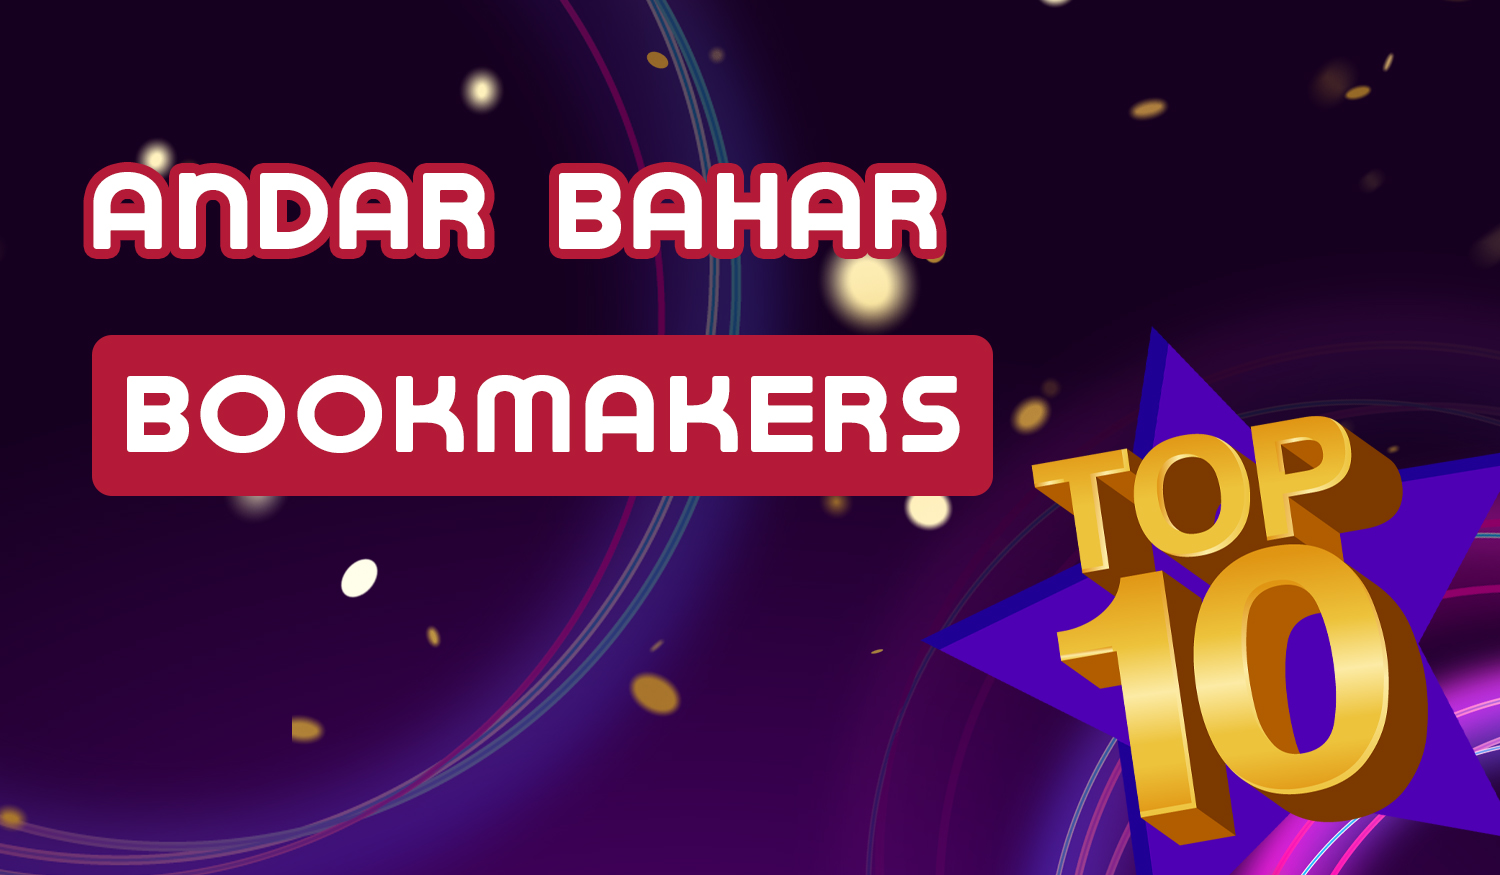 The Best Indian Bookmakers Providing Access to Andar Bahar Game Online